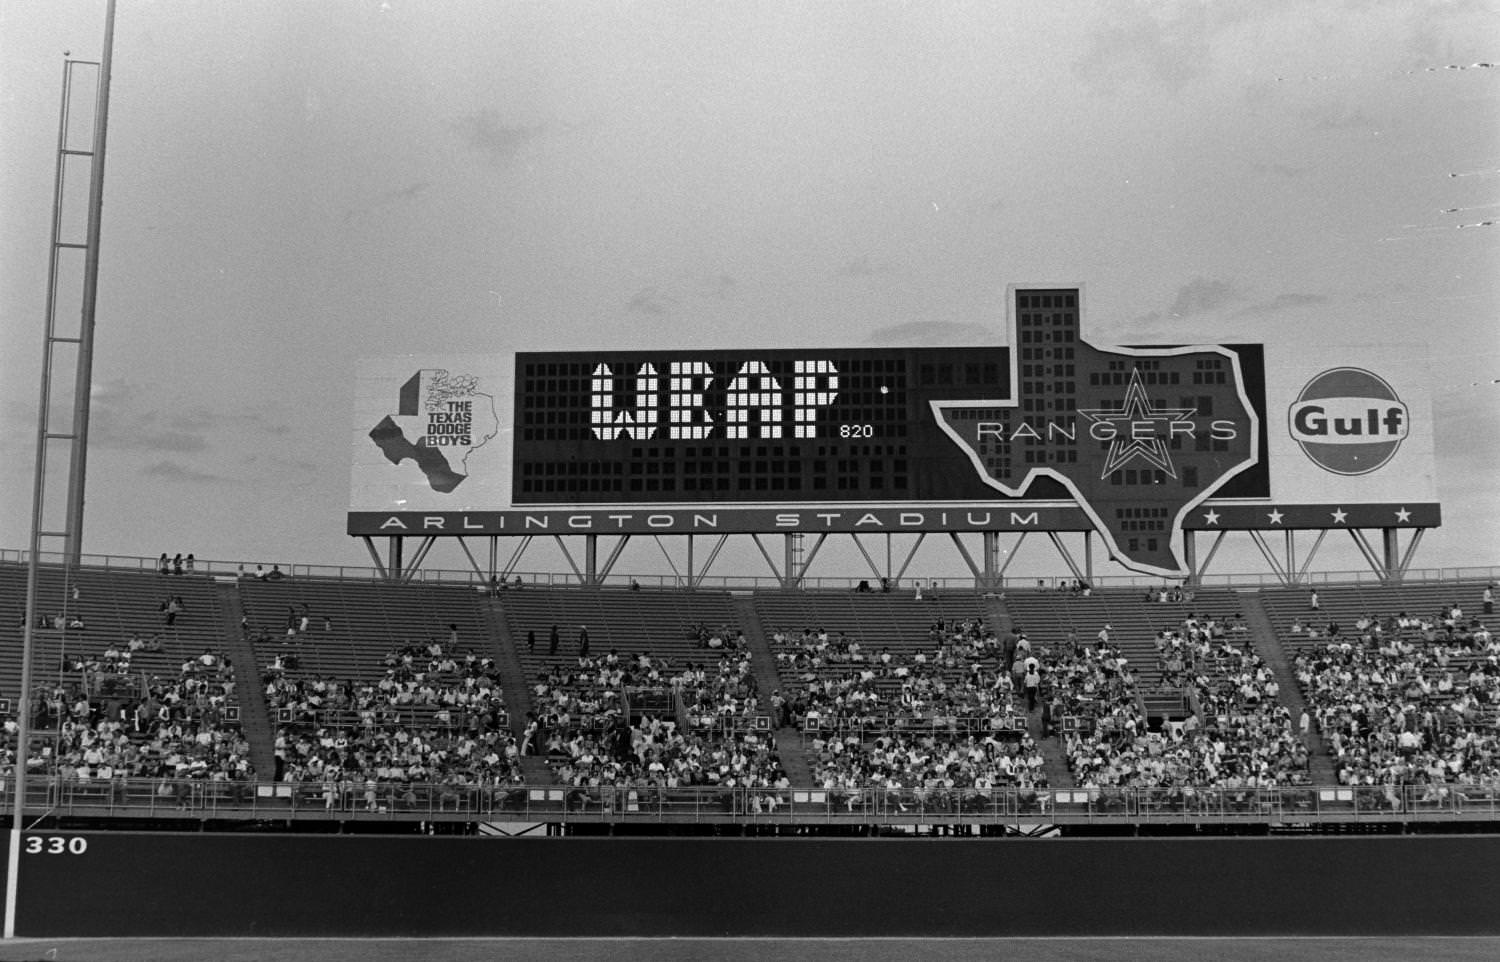 The scoreboard at Arlington Stadium during WBAP's Country Gold third anniversary event, 1973